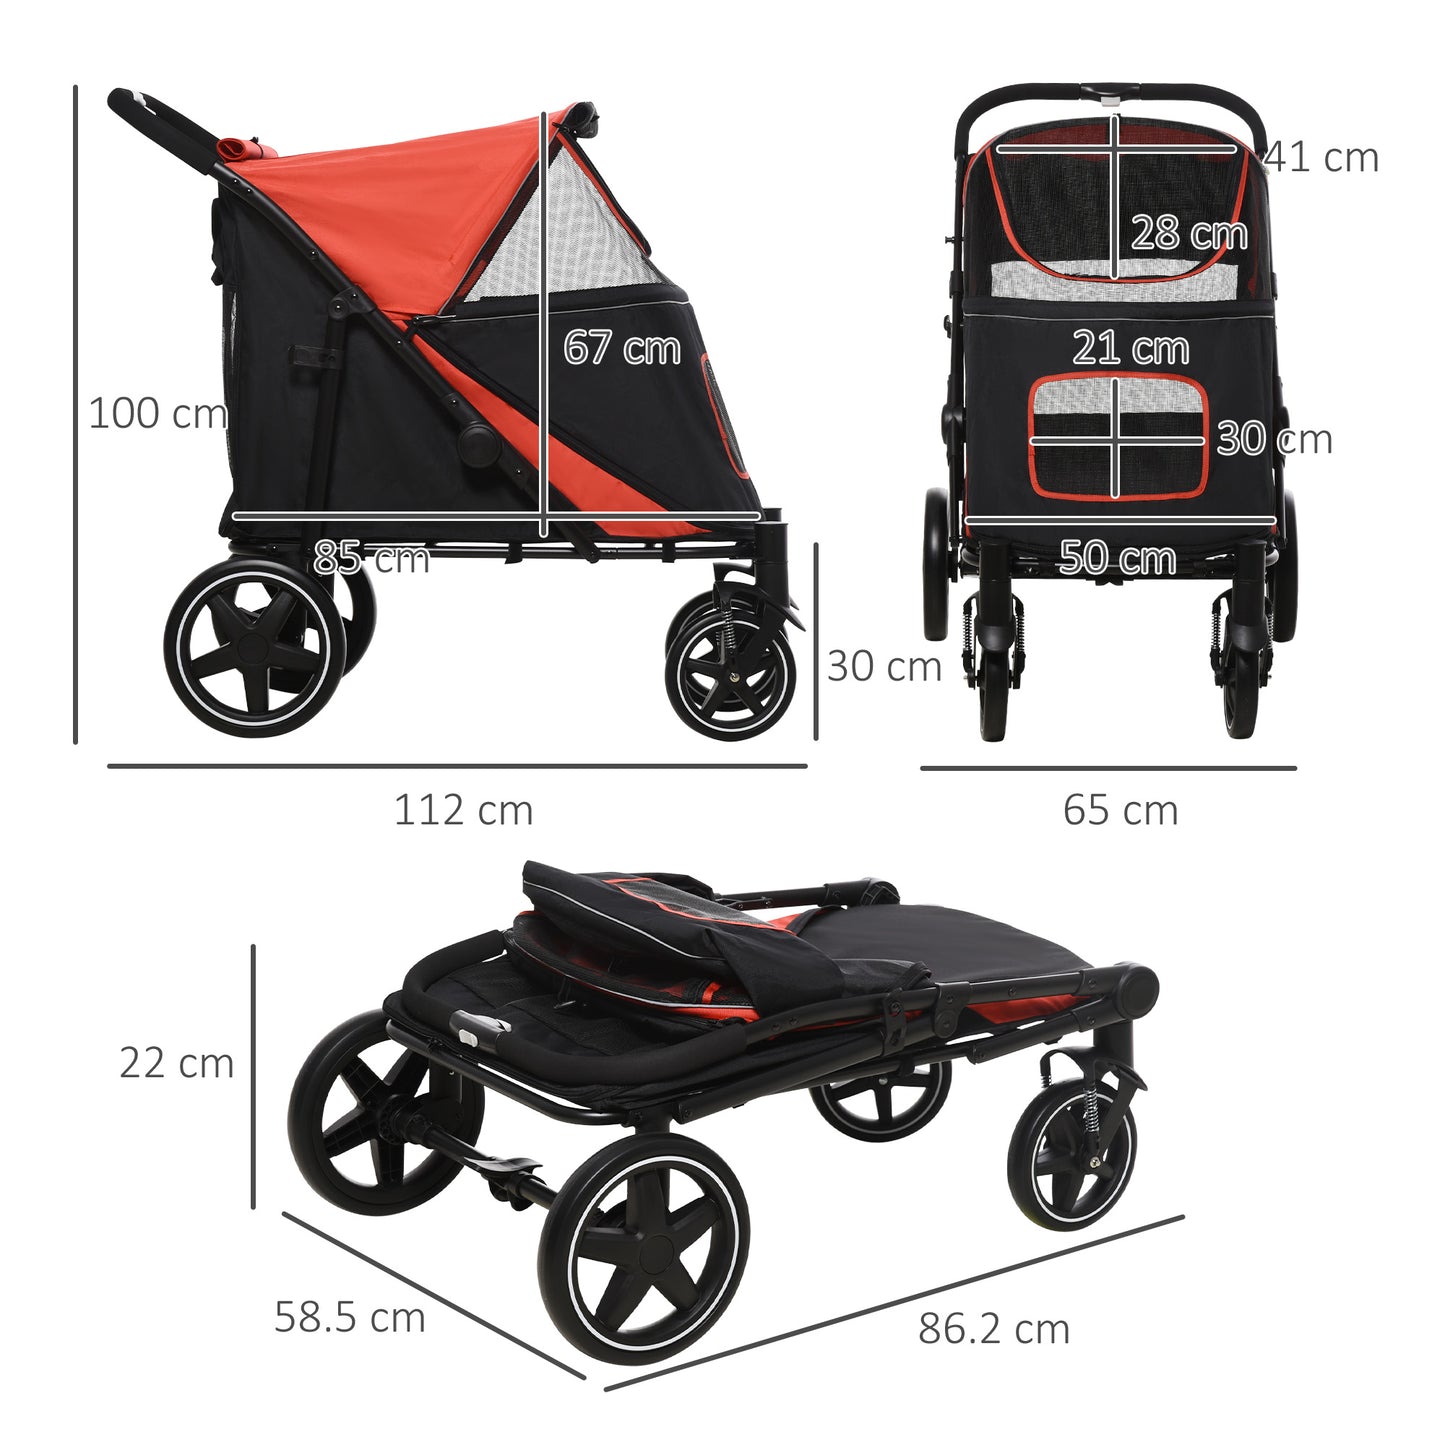 PawHut Pet Stroller with Universal Front Wheels, Shock Absorber, One Click Foldable Dog Cat Carriage with Brakes, Storage Bags, Mesh Window, Safety Leash for Large & Medium-sized Dogs, Red